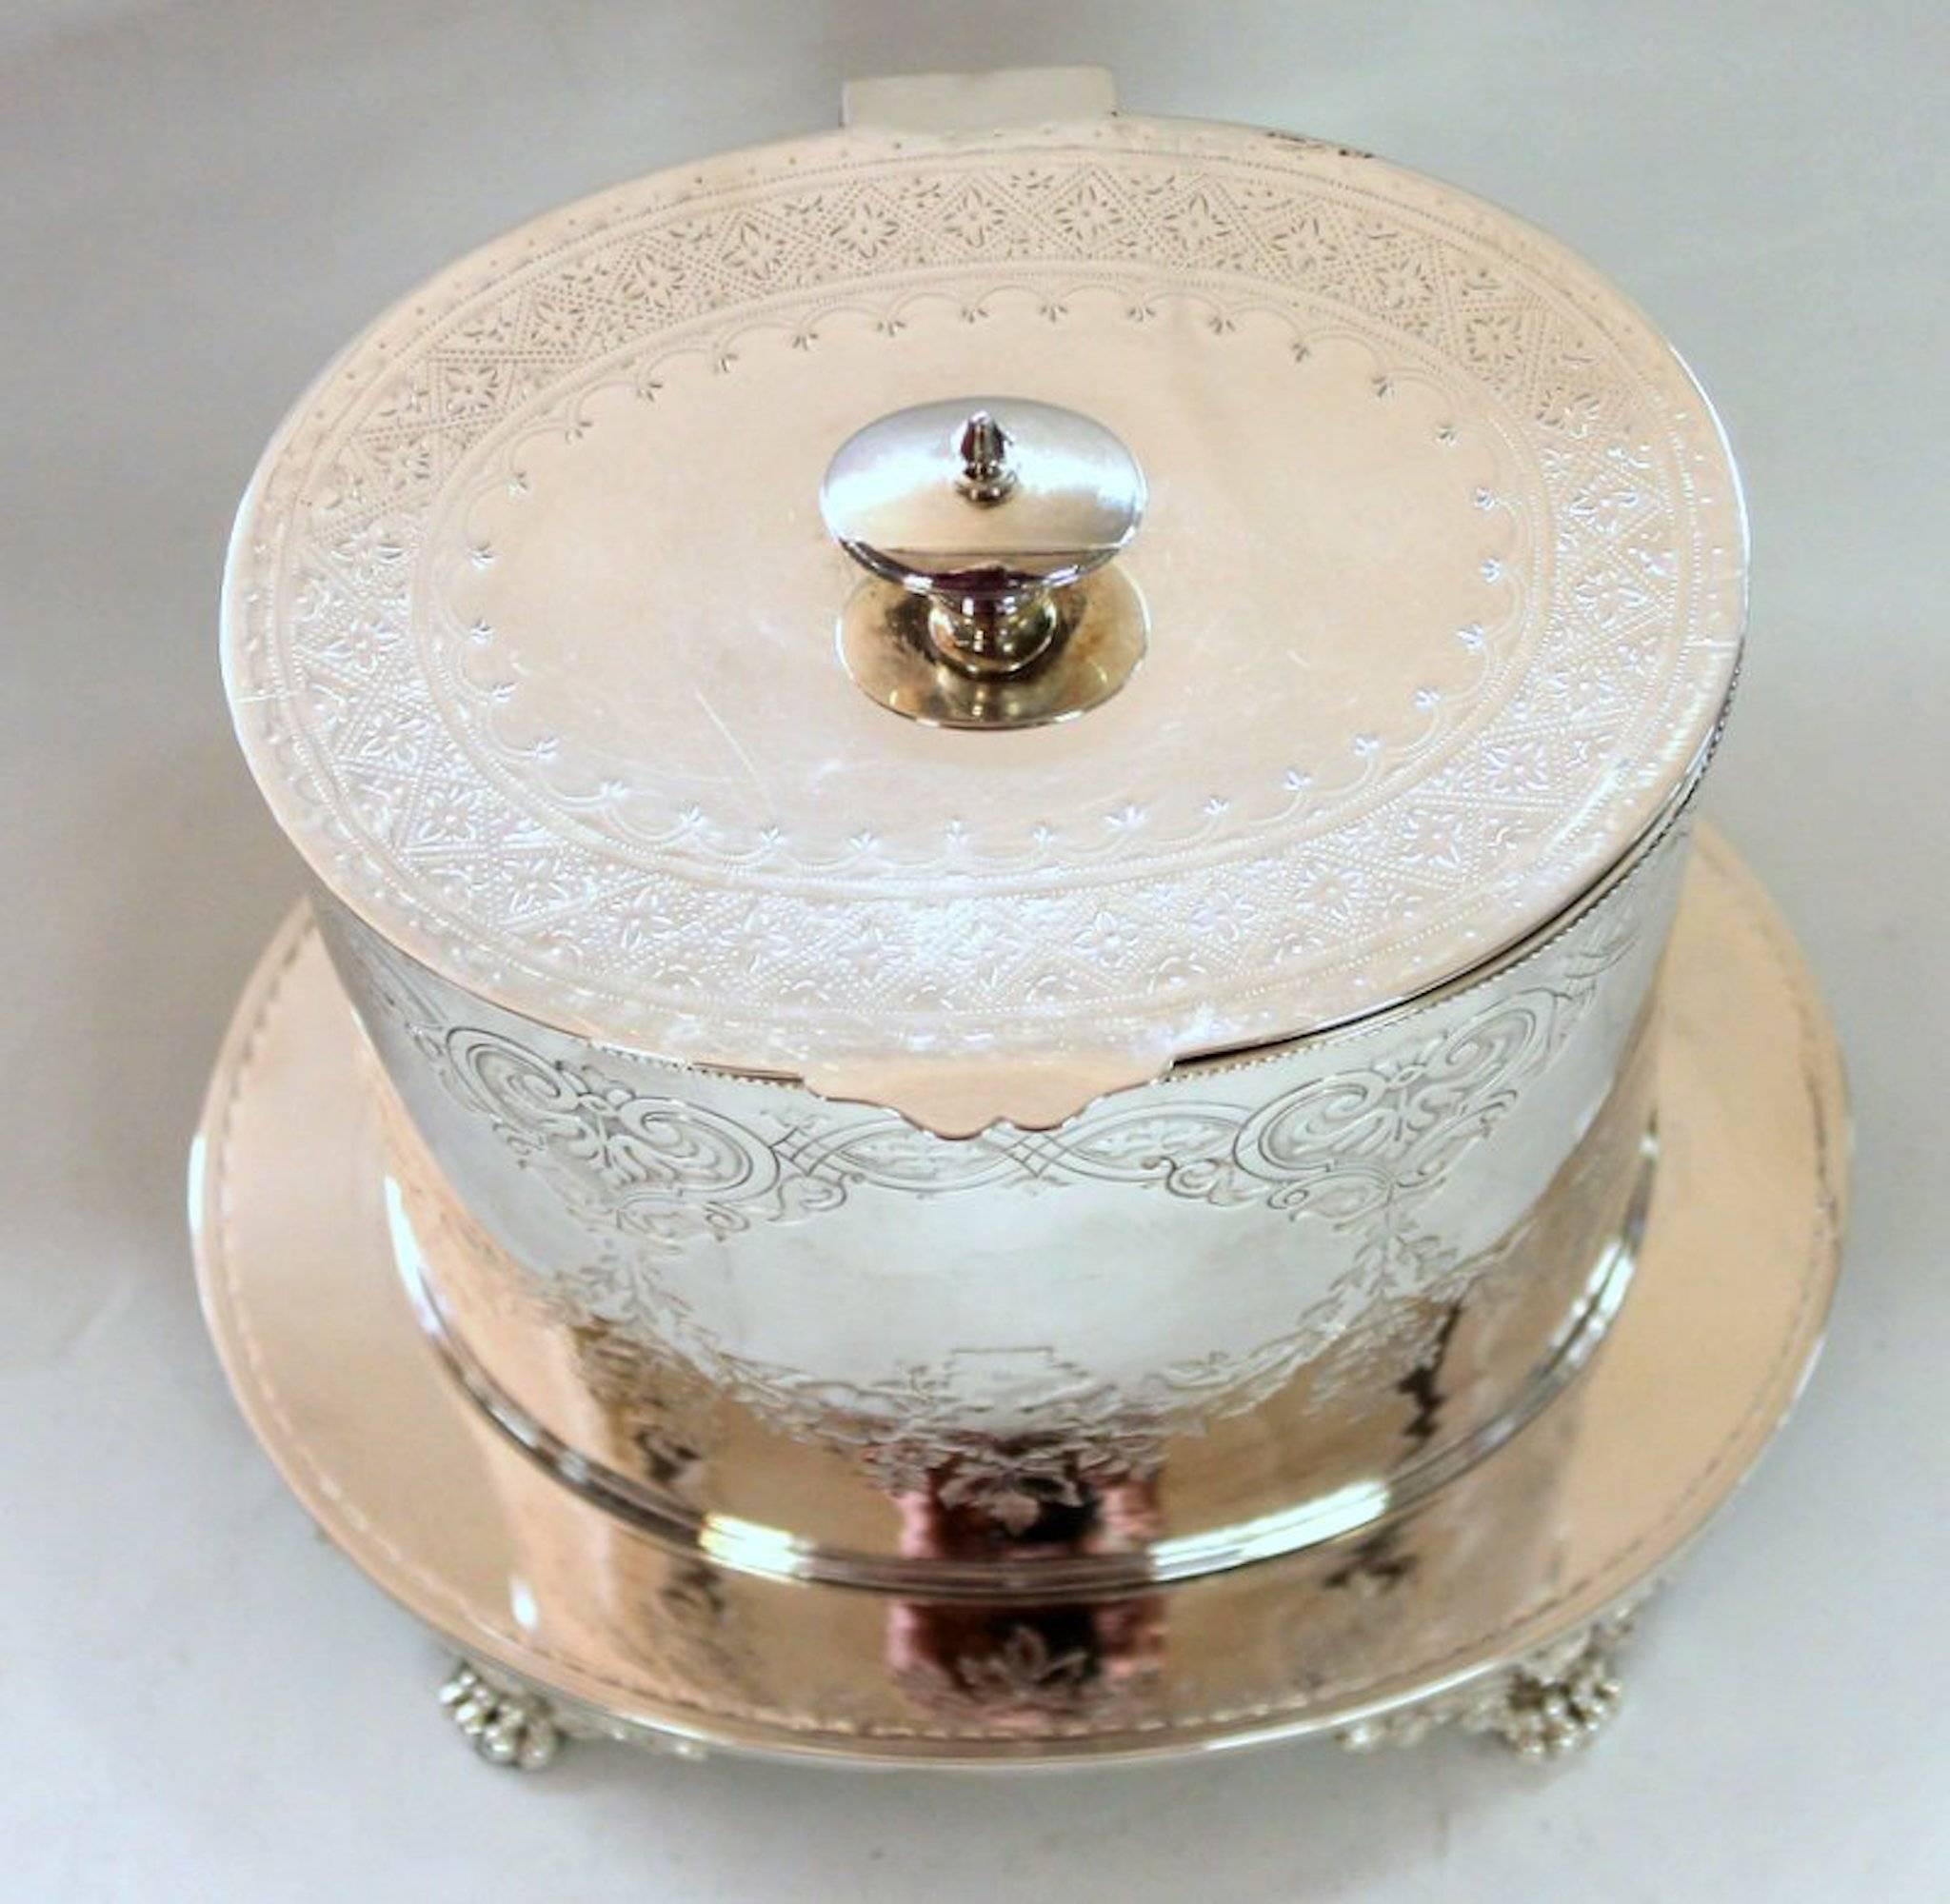 Engraved Antique English Sheffield Silver Plate Oval Biscuit Box, John Wigfall & Co.